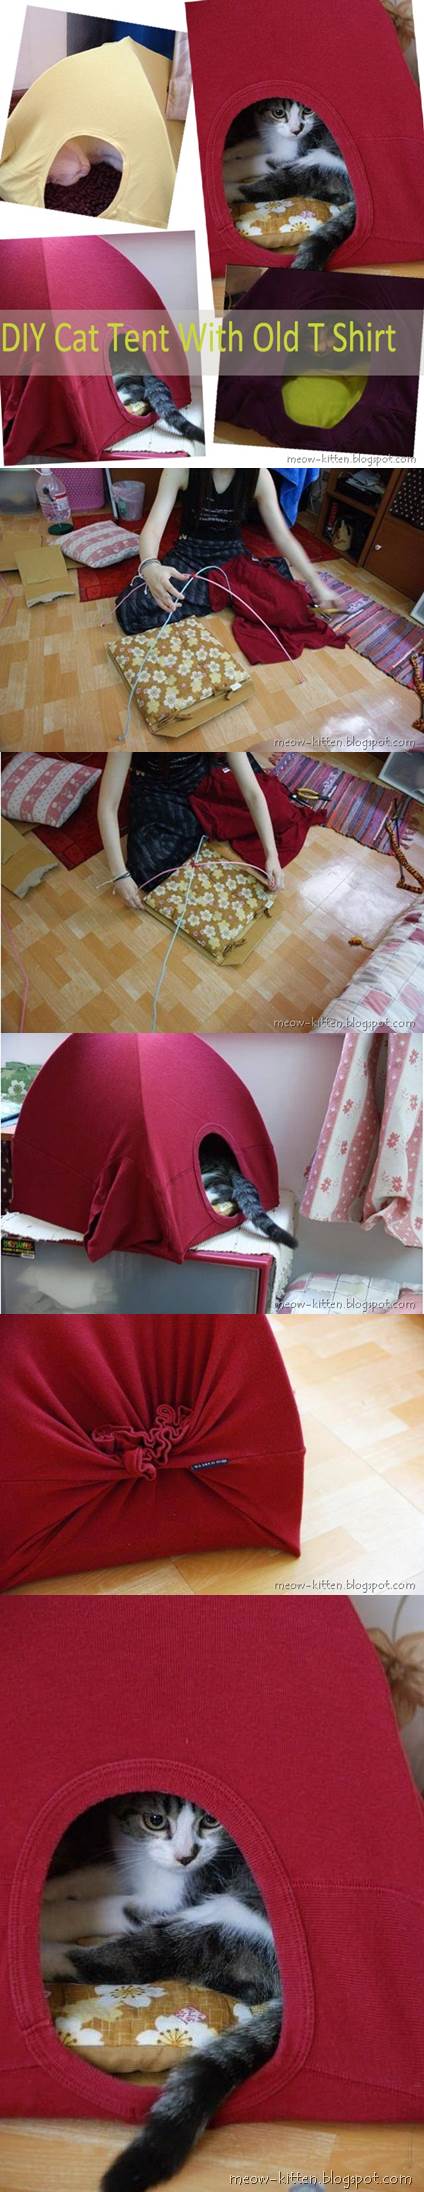 DIY Cat Tent with Your Old Tshirts 2